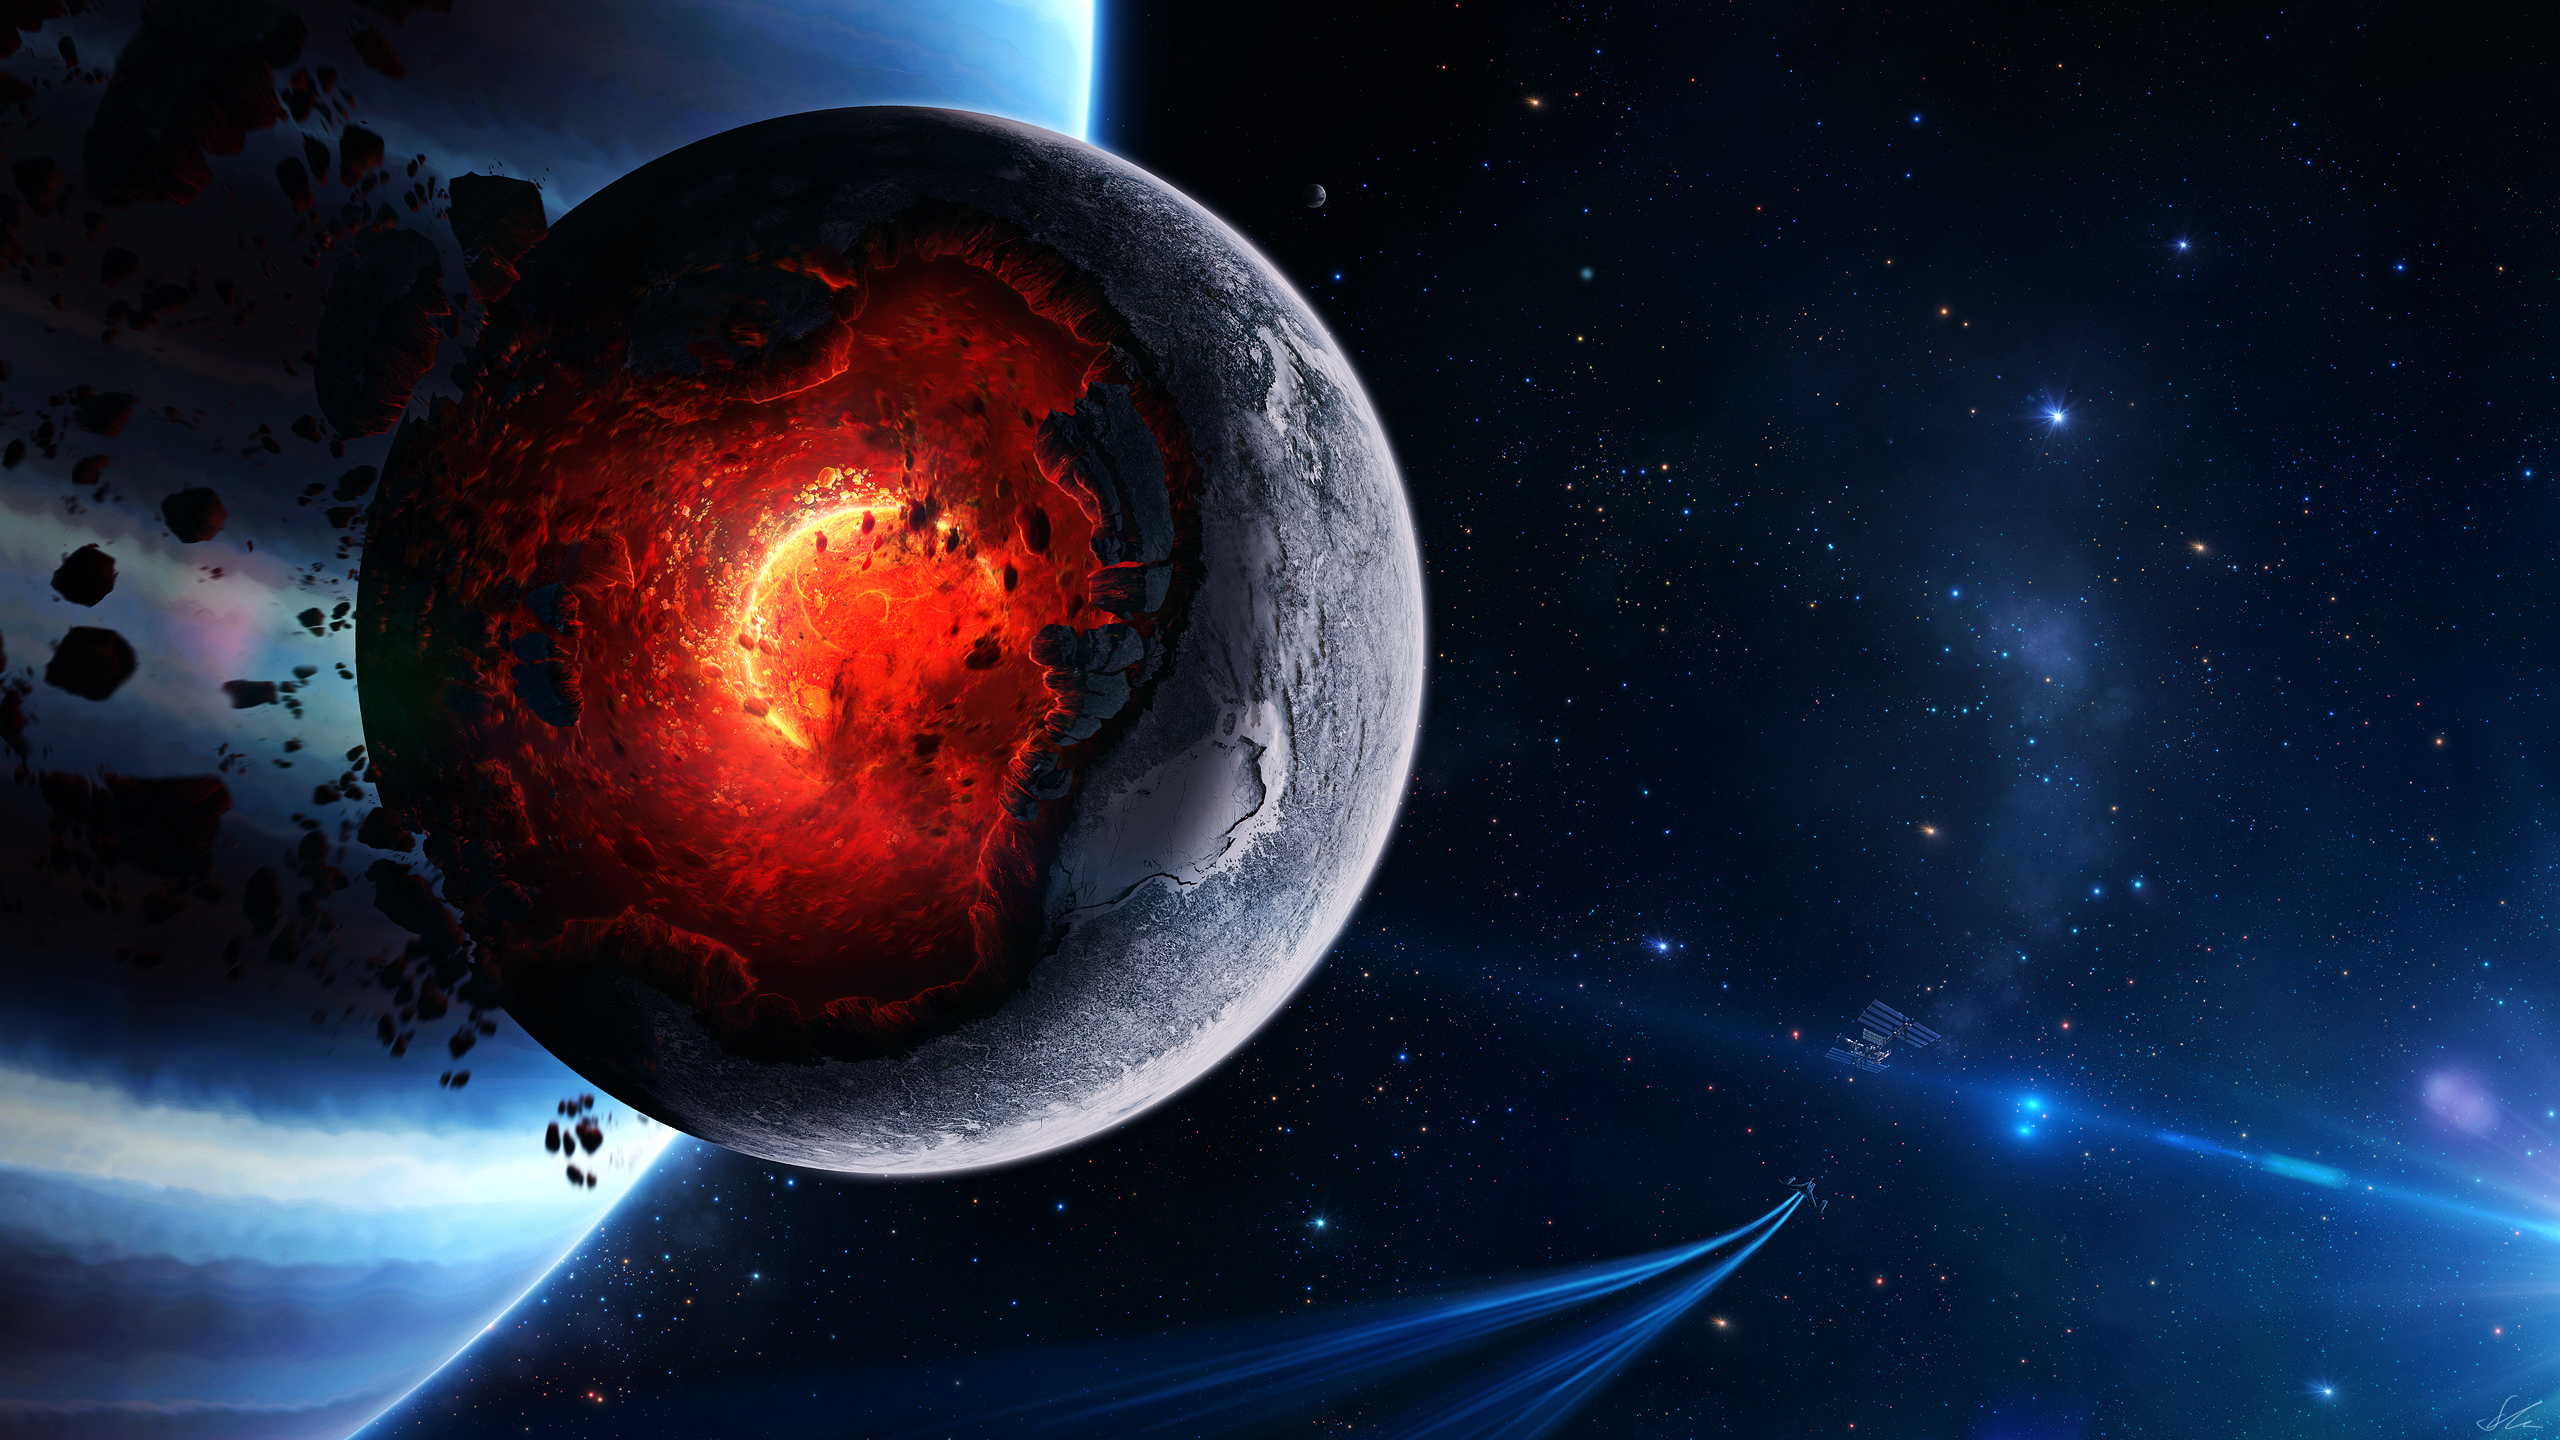 Space Cataclysm Planet Art Explosion Asteroids Comets Fragments Mac Imac 27 Wallpaper Hd Wallpapers